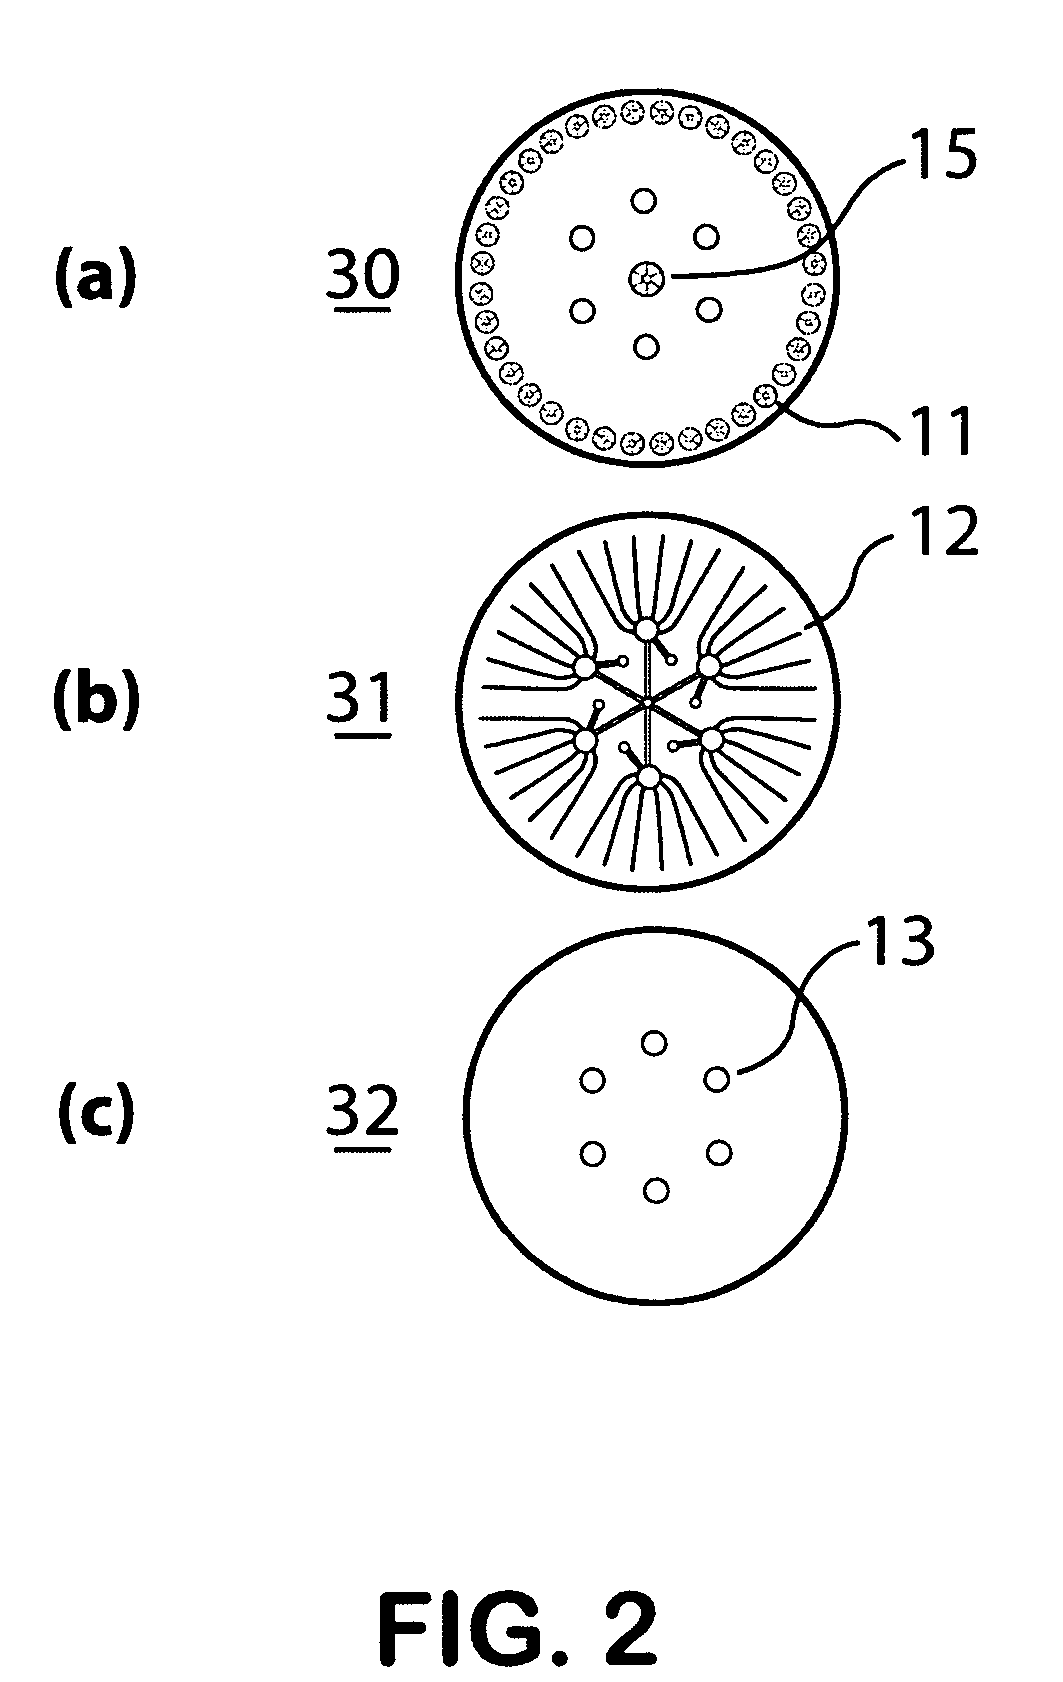 Self-contained microfluidic biochip and apparatus